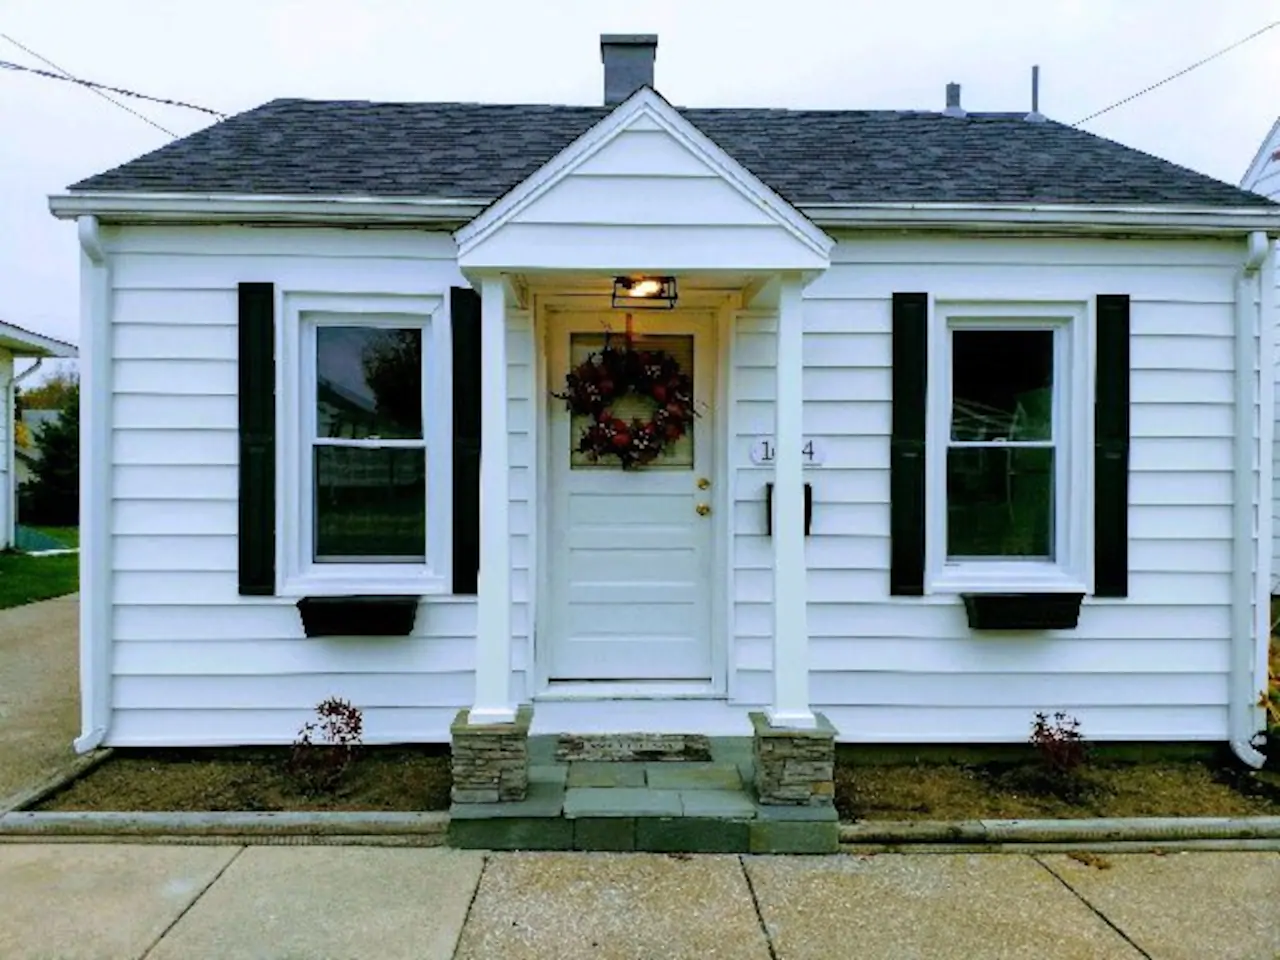 Charming white bungalow with black shutters in Erie, PA. This charming tiny house is one of the best Pennsylvania Airbnb around!